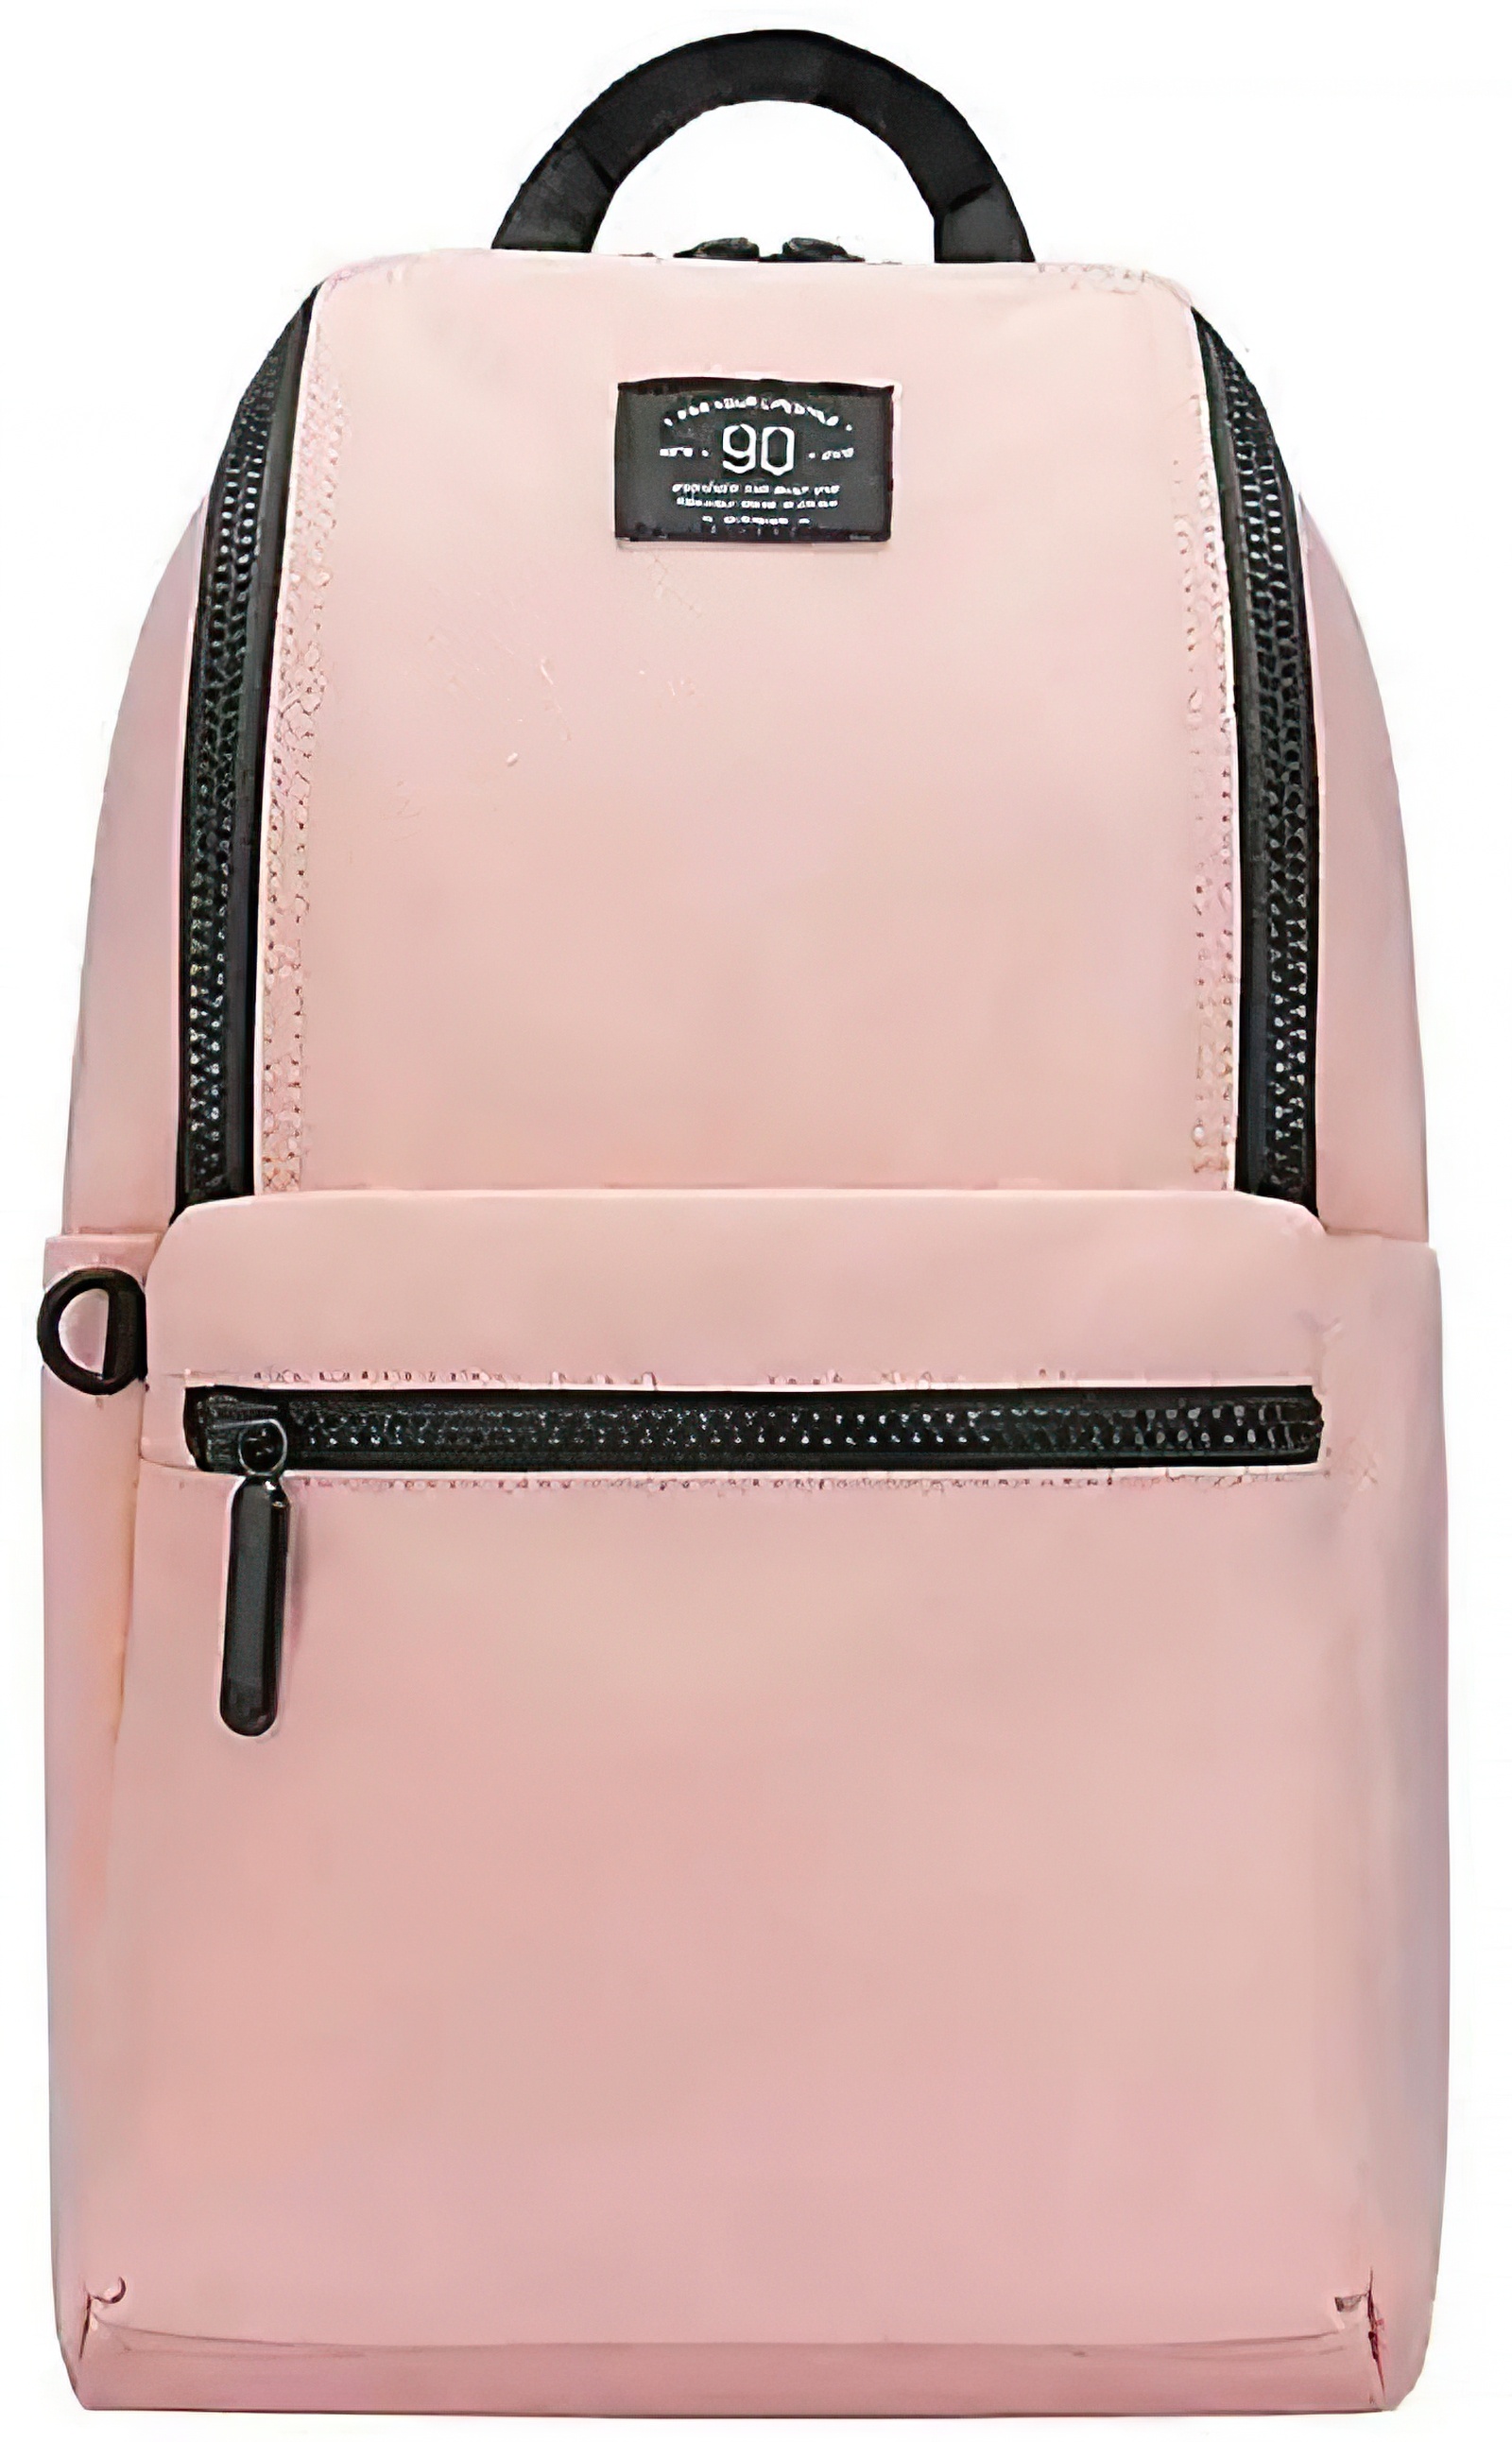 Xiaomi 90 Points Pro Leisure Travel Backpack 18L Pink КАРКАМ - фото 1